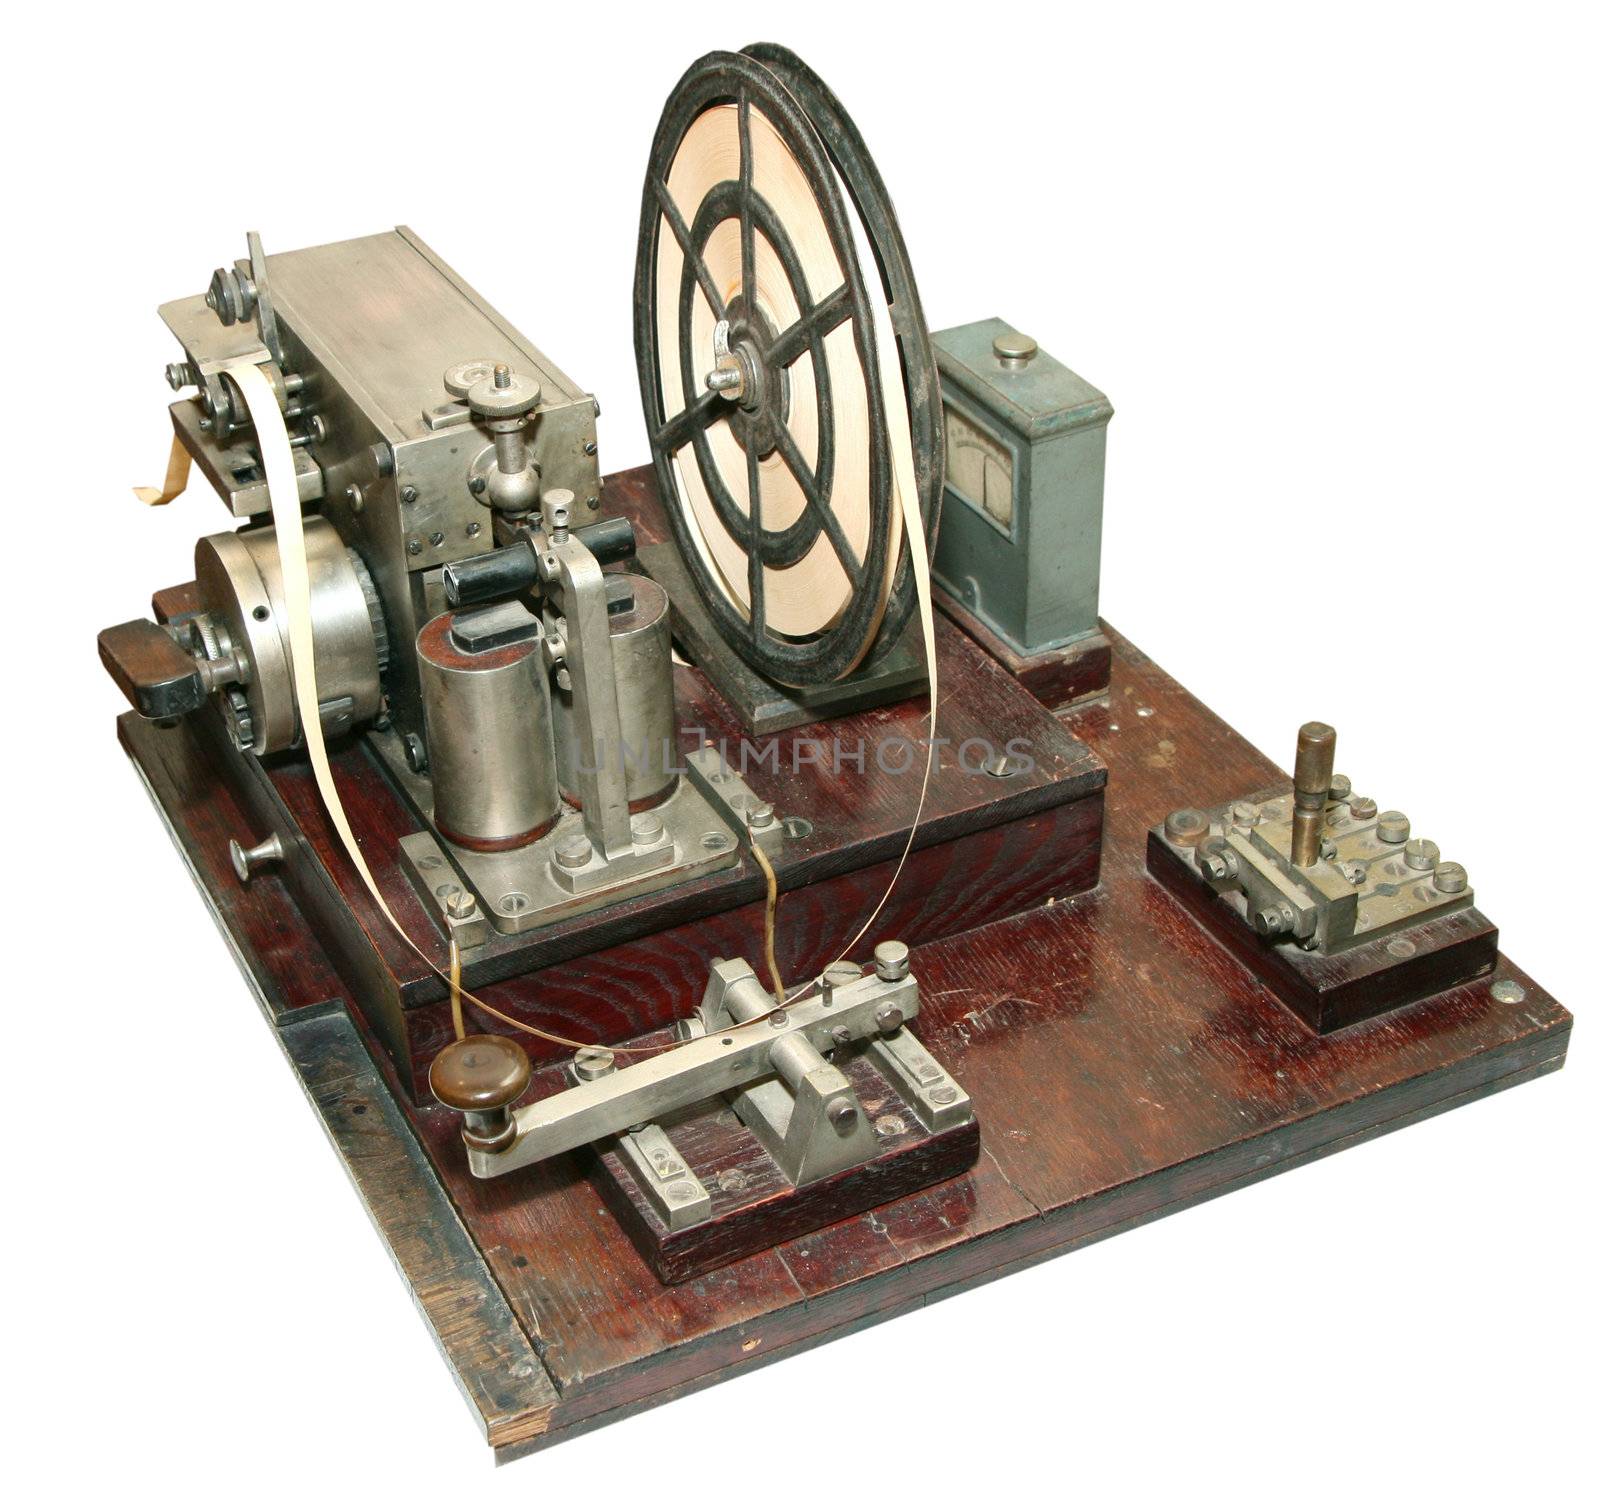 isolated obsolete vintage morse telegraph machine by fotosergio